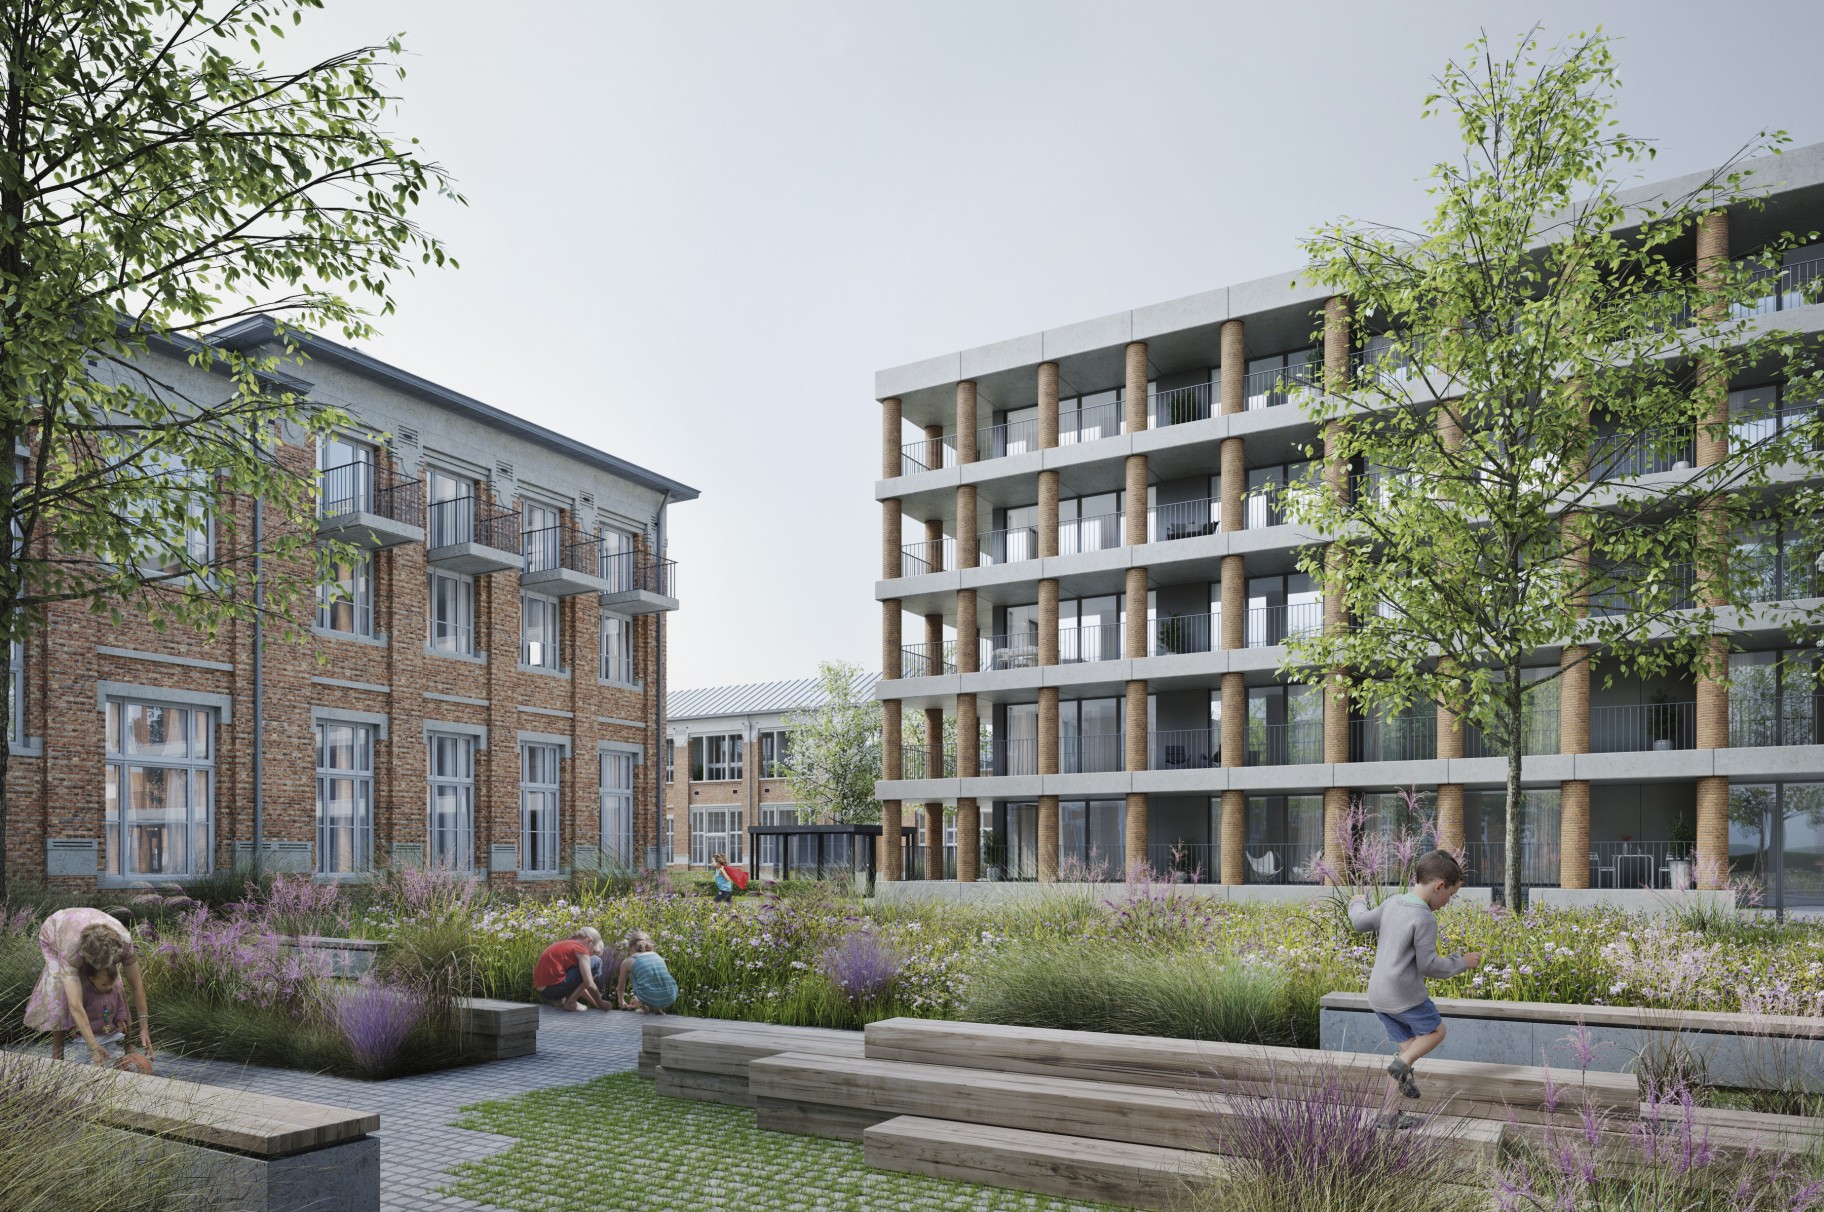 Vanhaerents, META, BOB361, Callebaut and OKRA win the competition for the re-purposing of the Normaalschool site in Lier